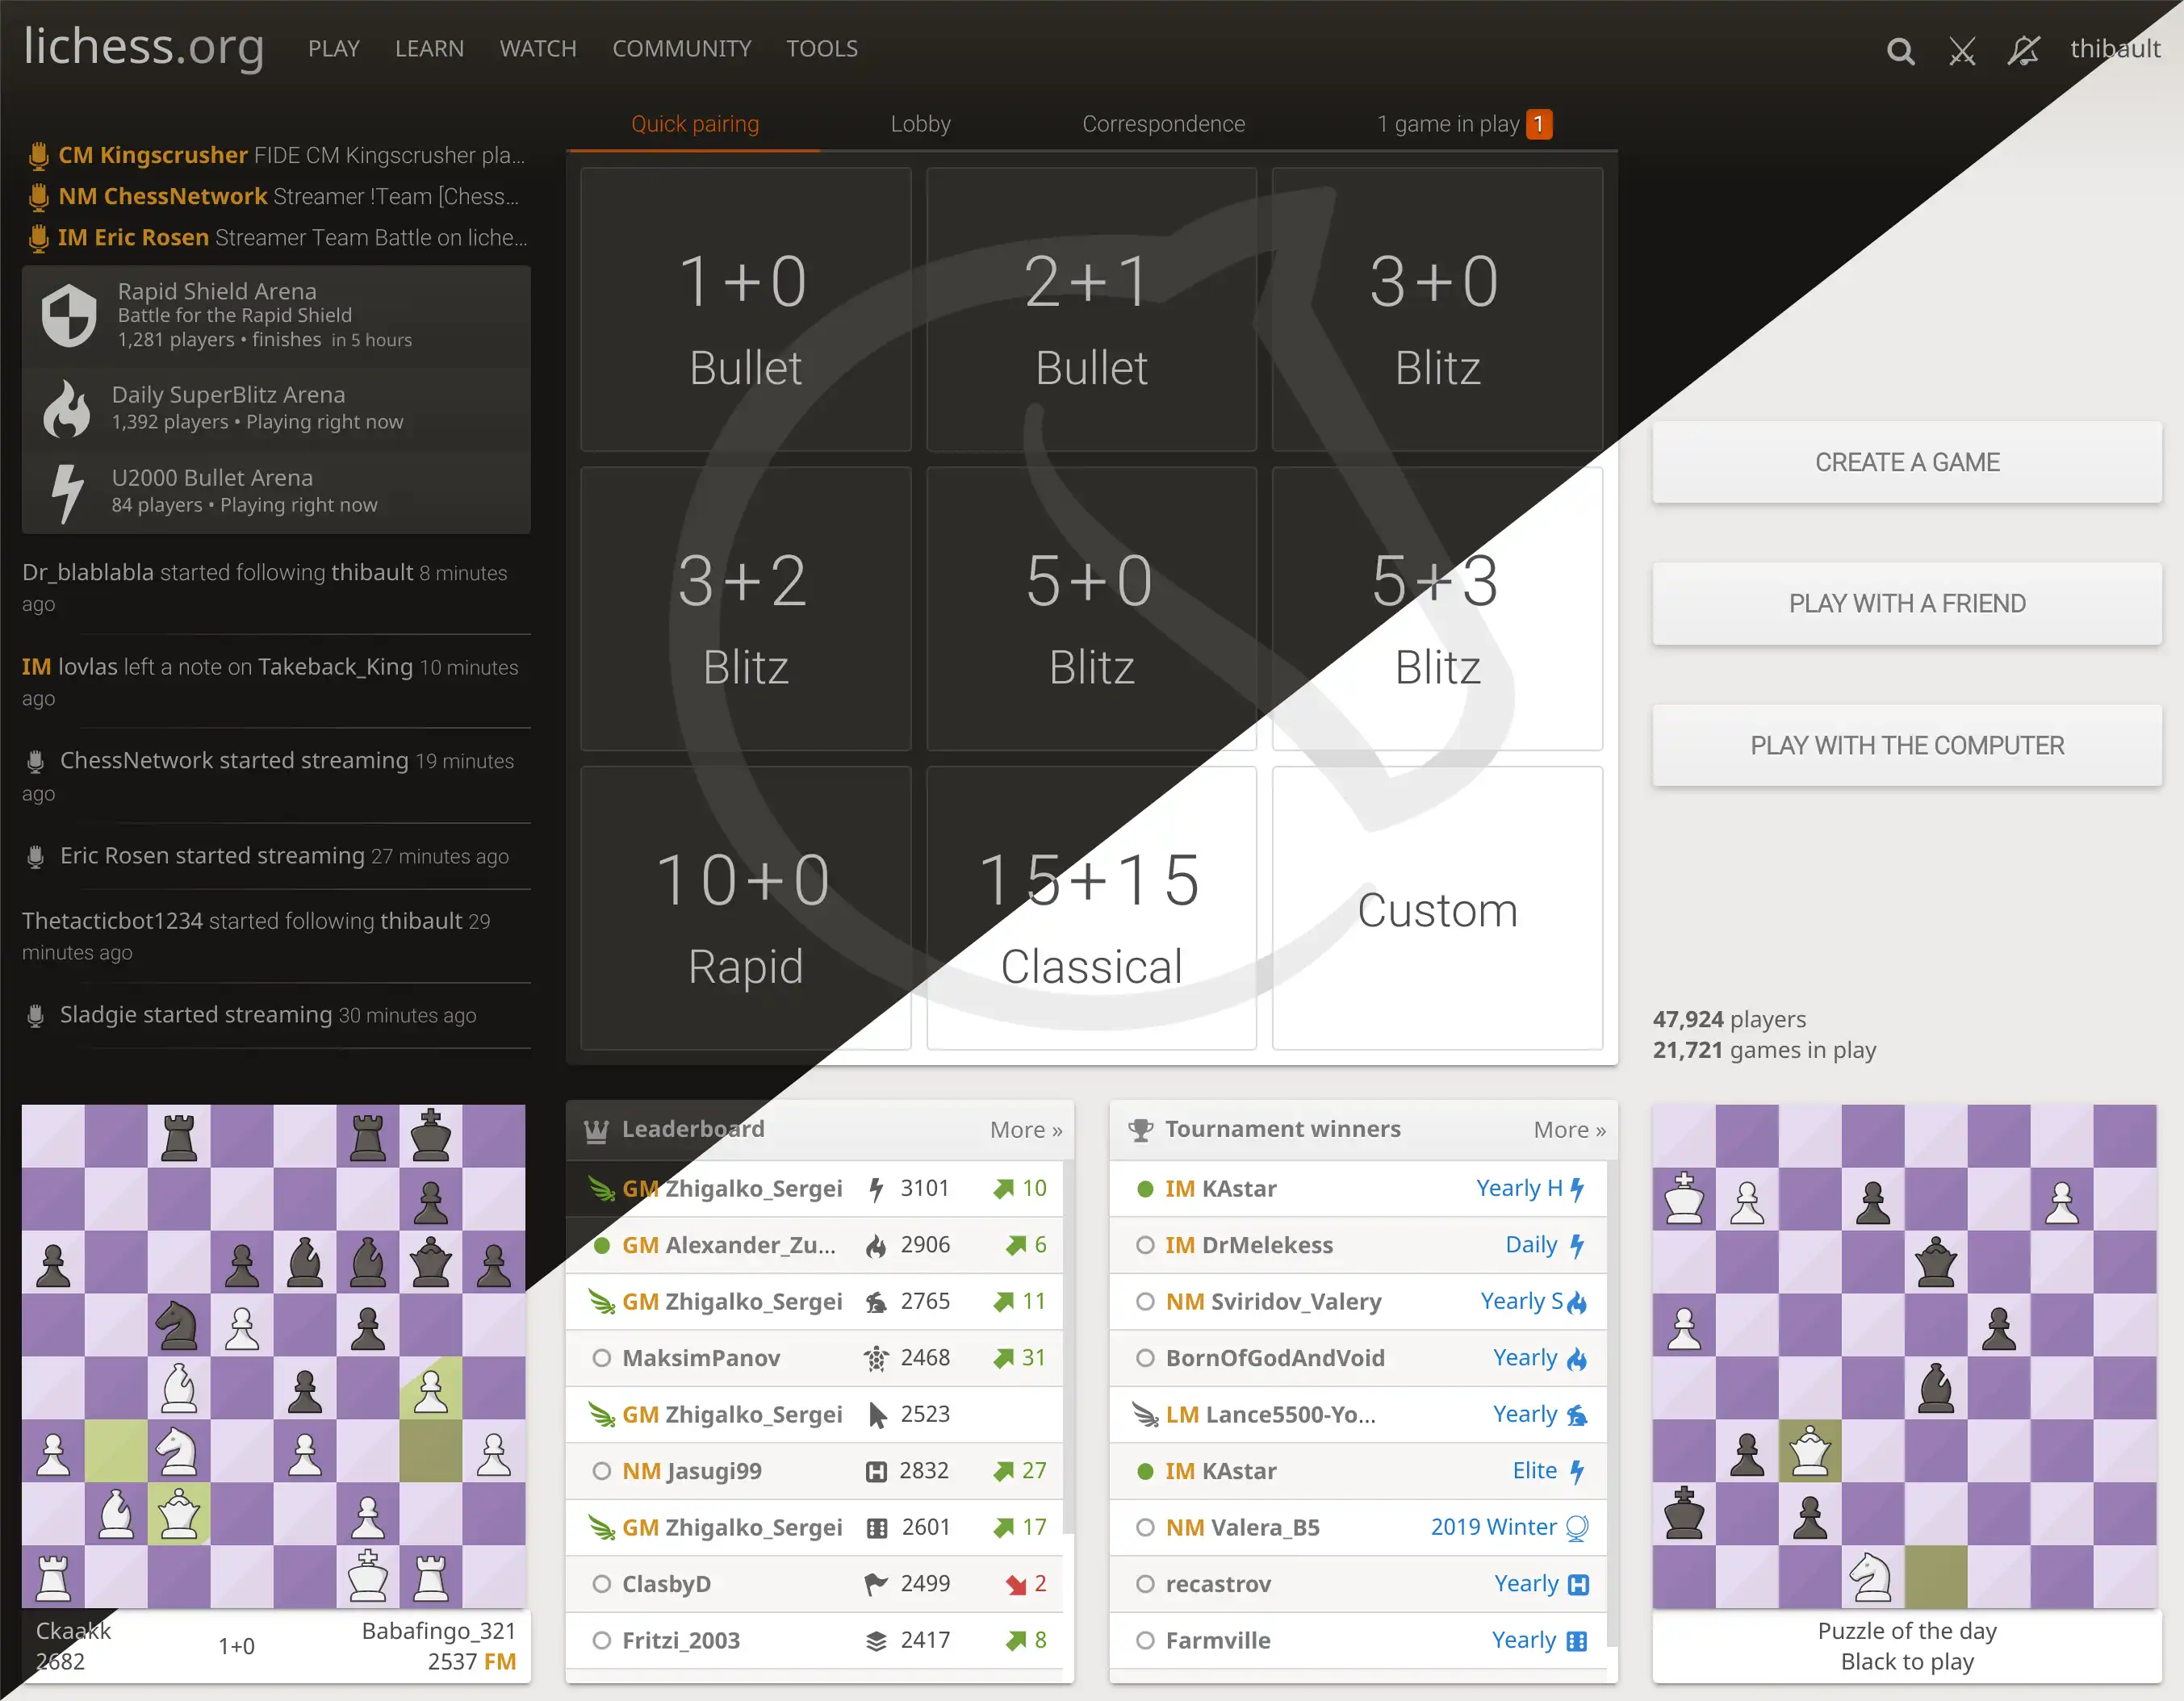 6 Best Free and Open Source FICS Chess Clients - LinuxLinks